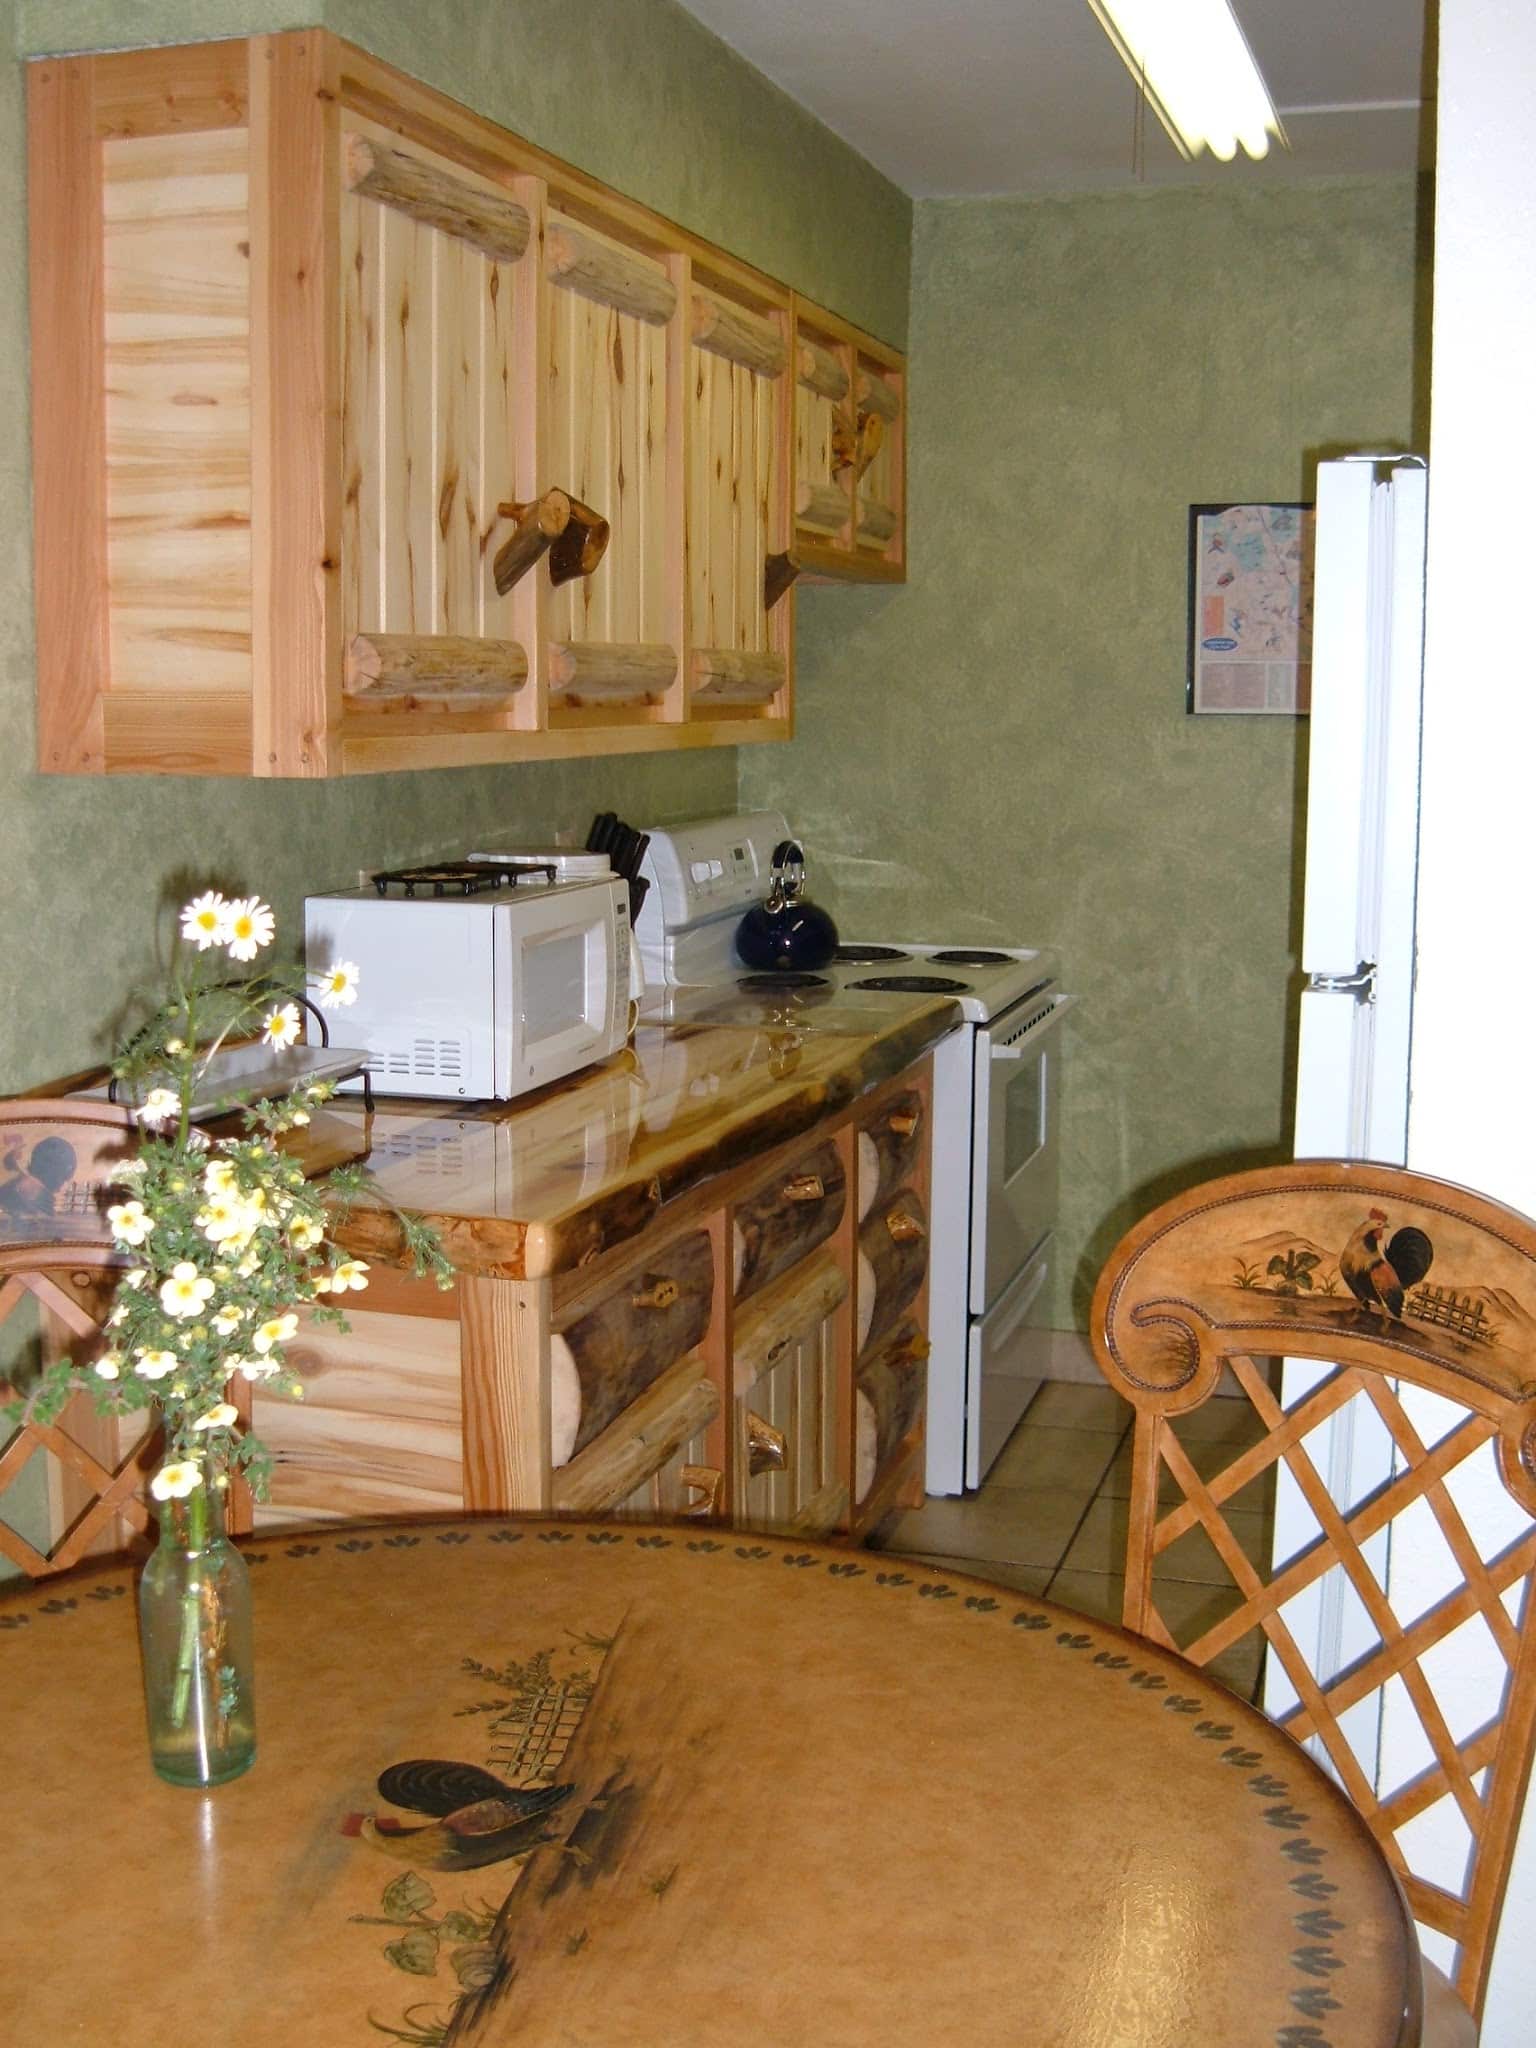 Kitchen with log cabinets, tile floor, faux green walls, table and chairs.